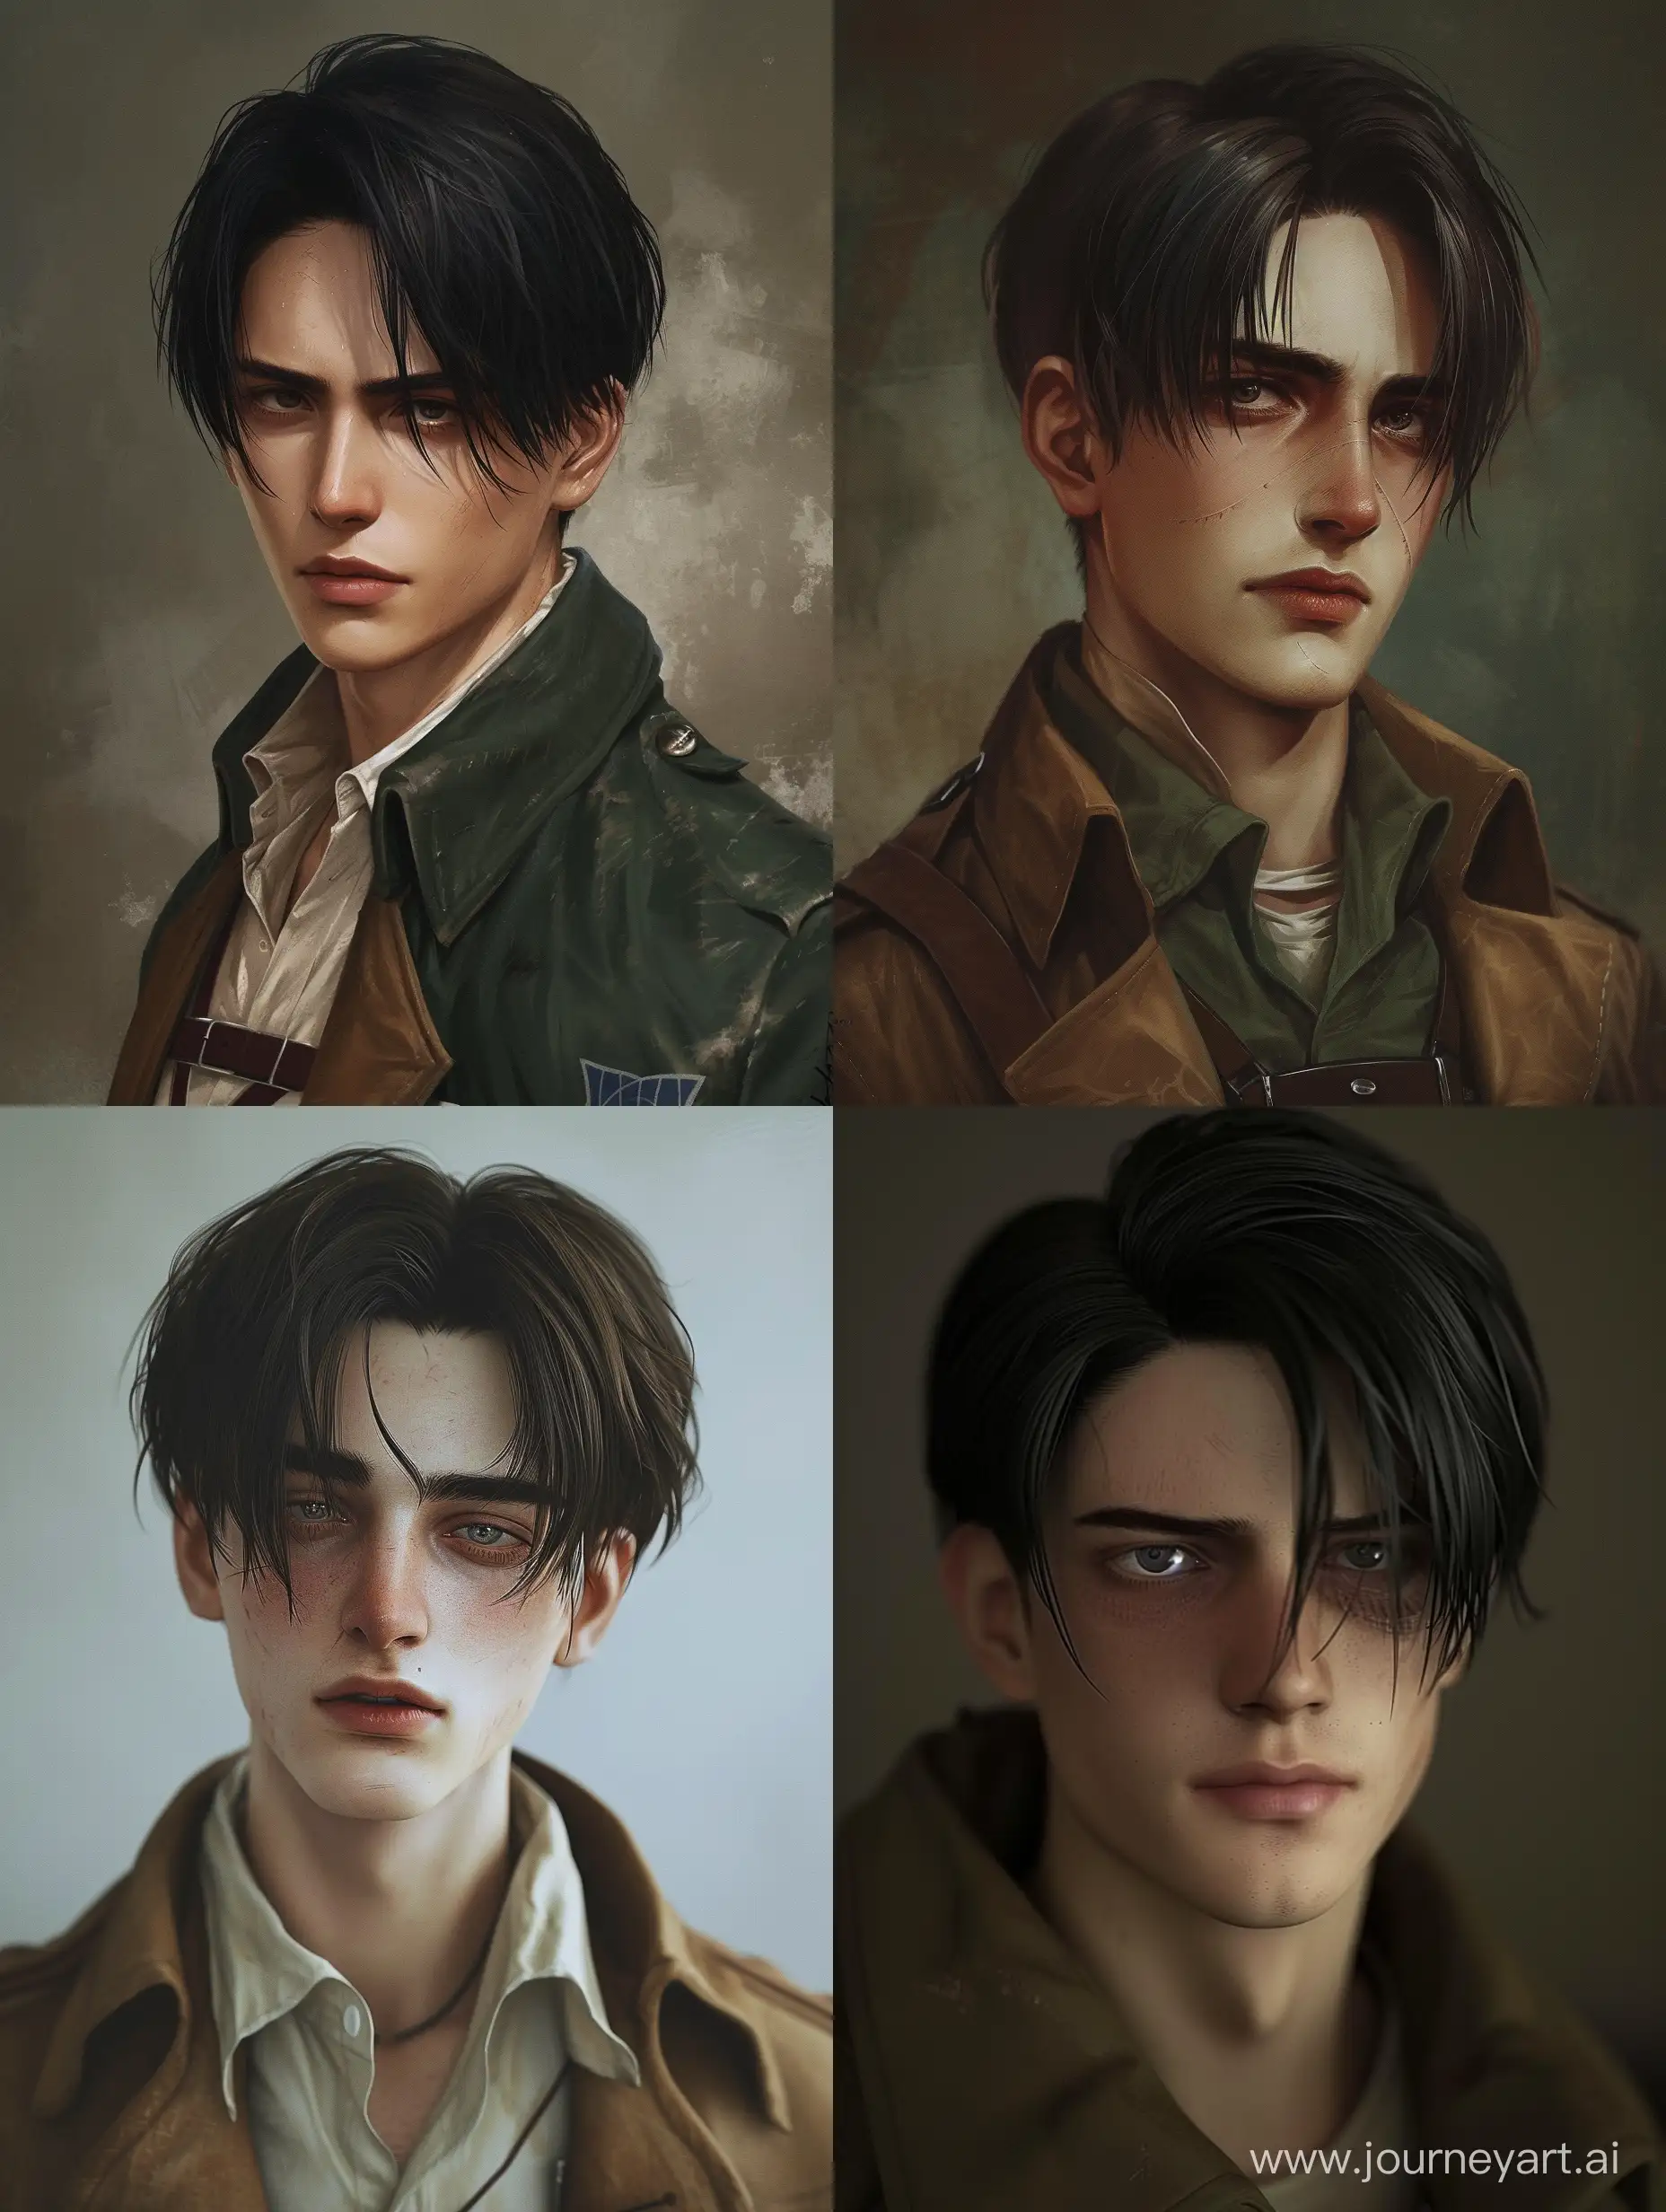 Realistic Levi Ackerman from Attack on Titan, in his 30s, with normal dark circles and slight smirk